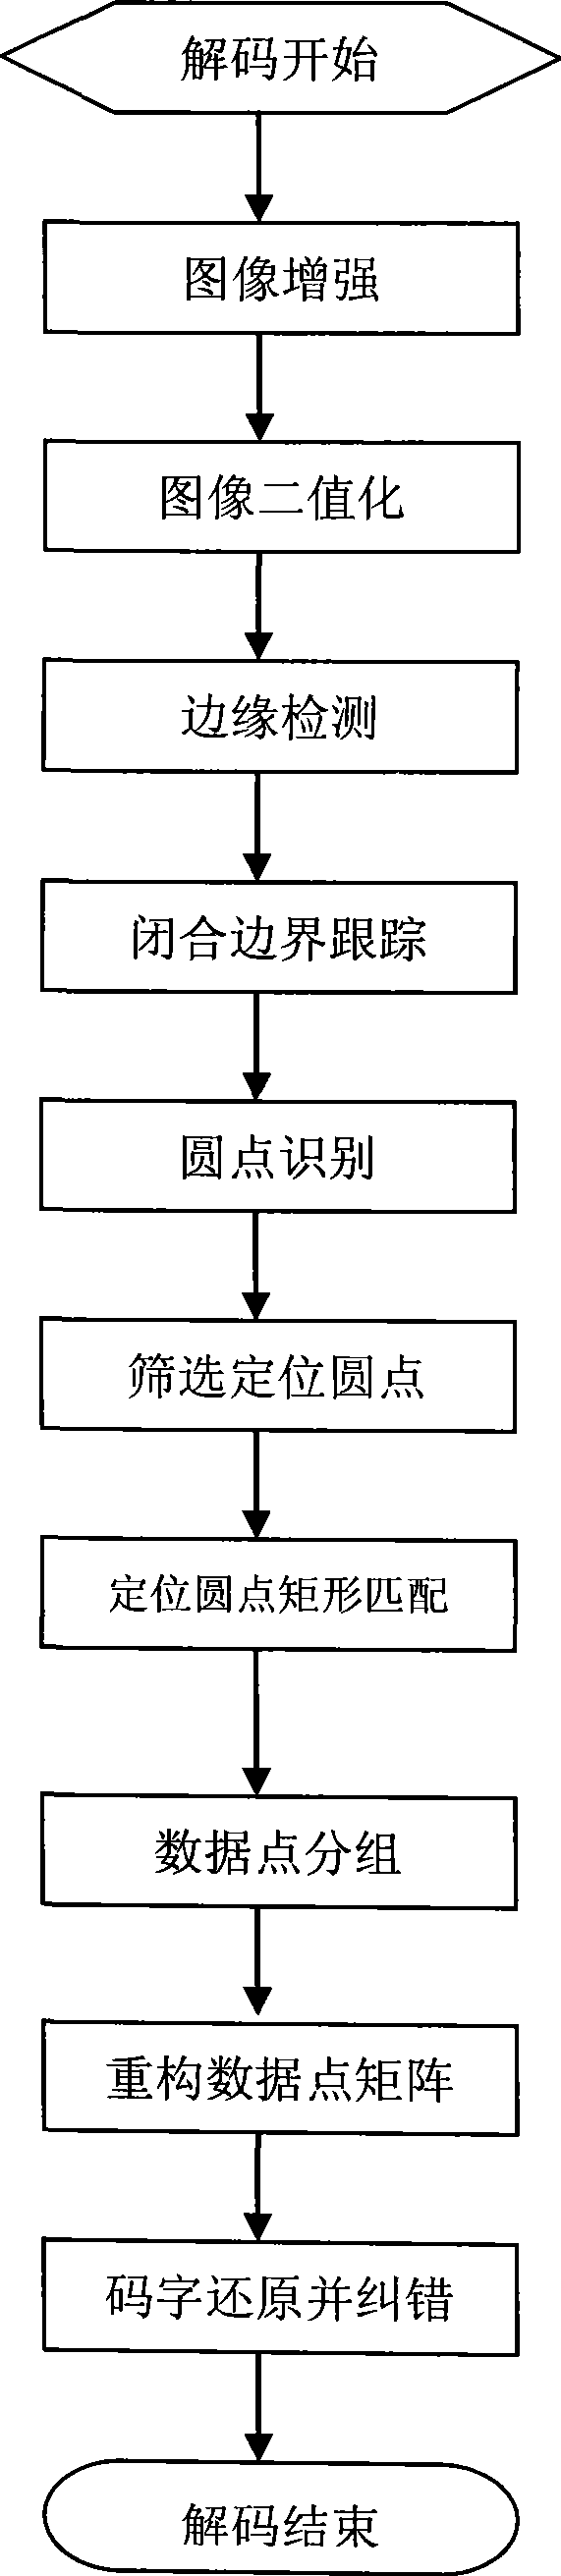 Two-dimensional code, printed publication applying the two-dimensional code and decoding process